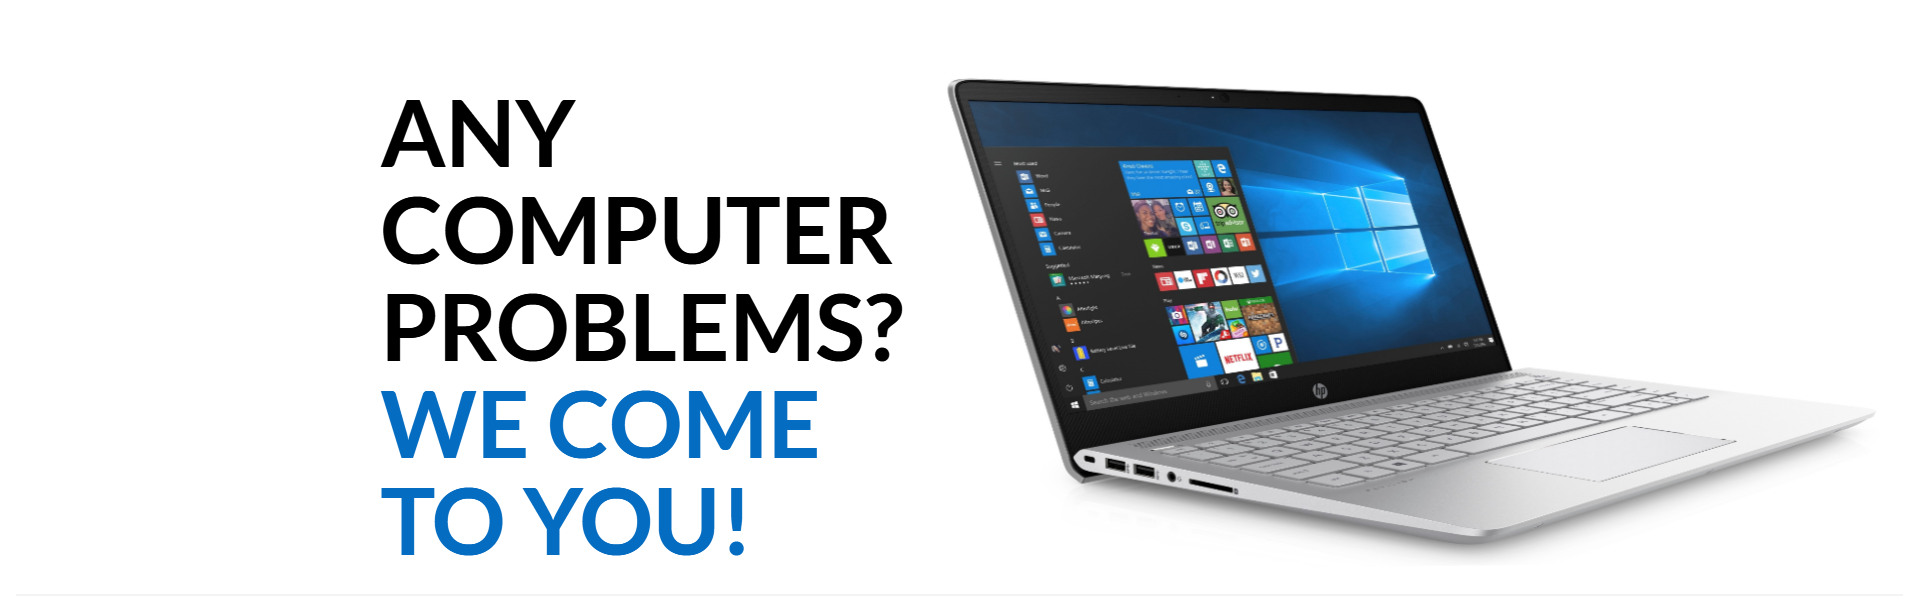 Laptop with text for Computer Problems we come to you